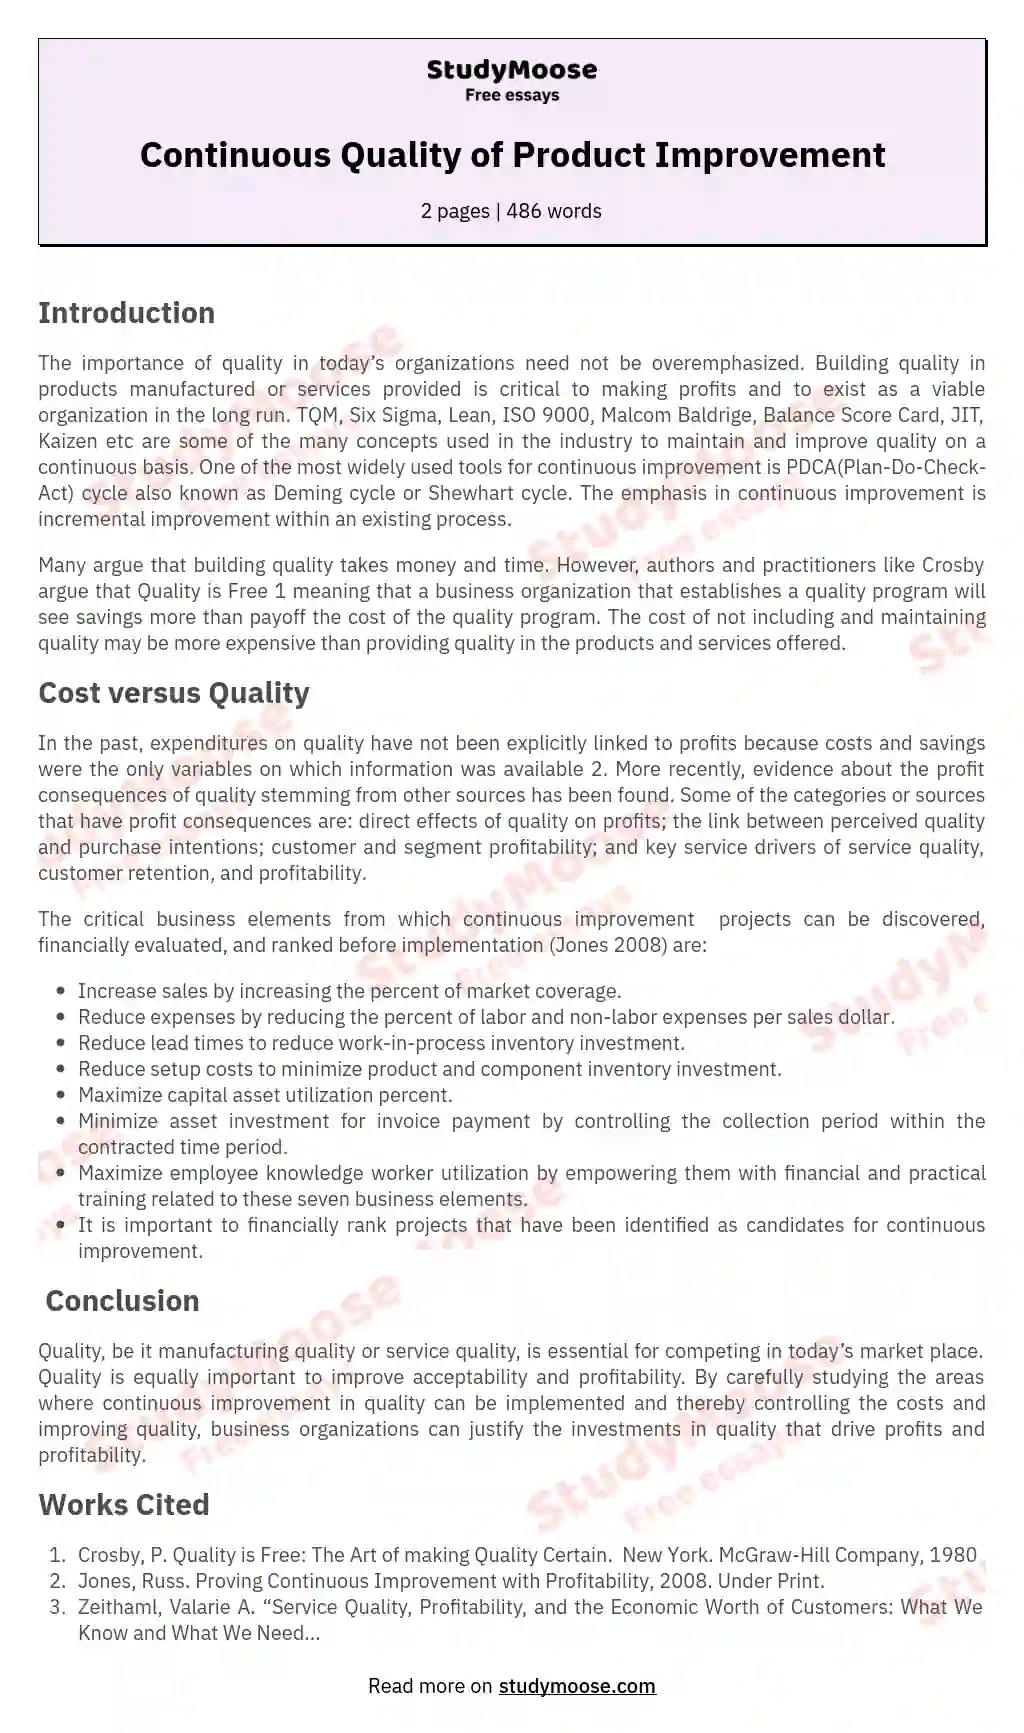 Continuous Quality of Product Improvement essay